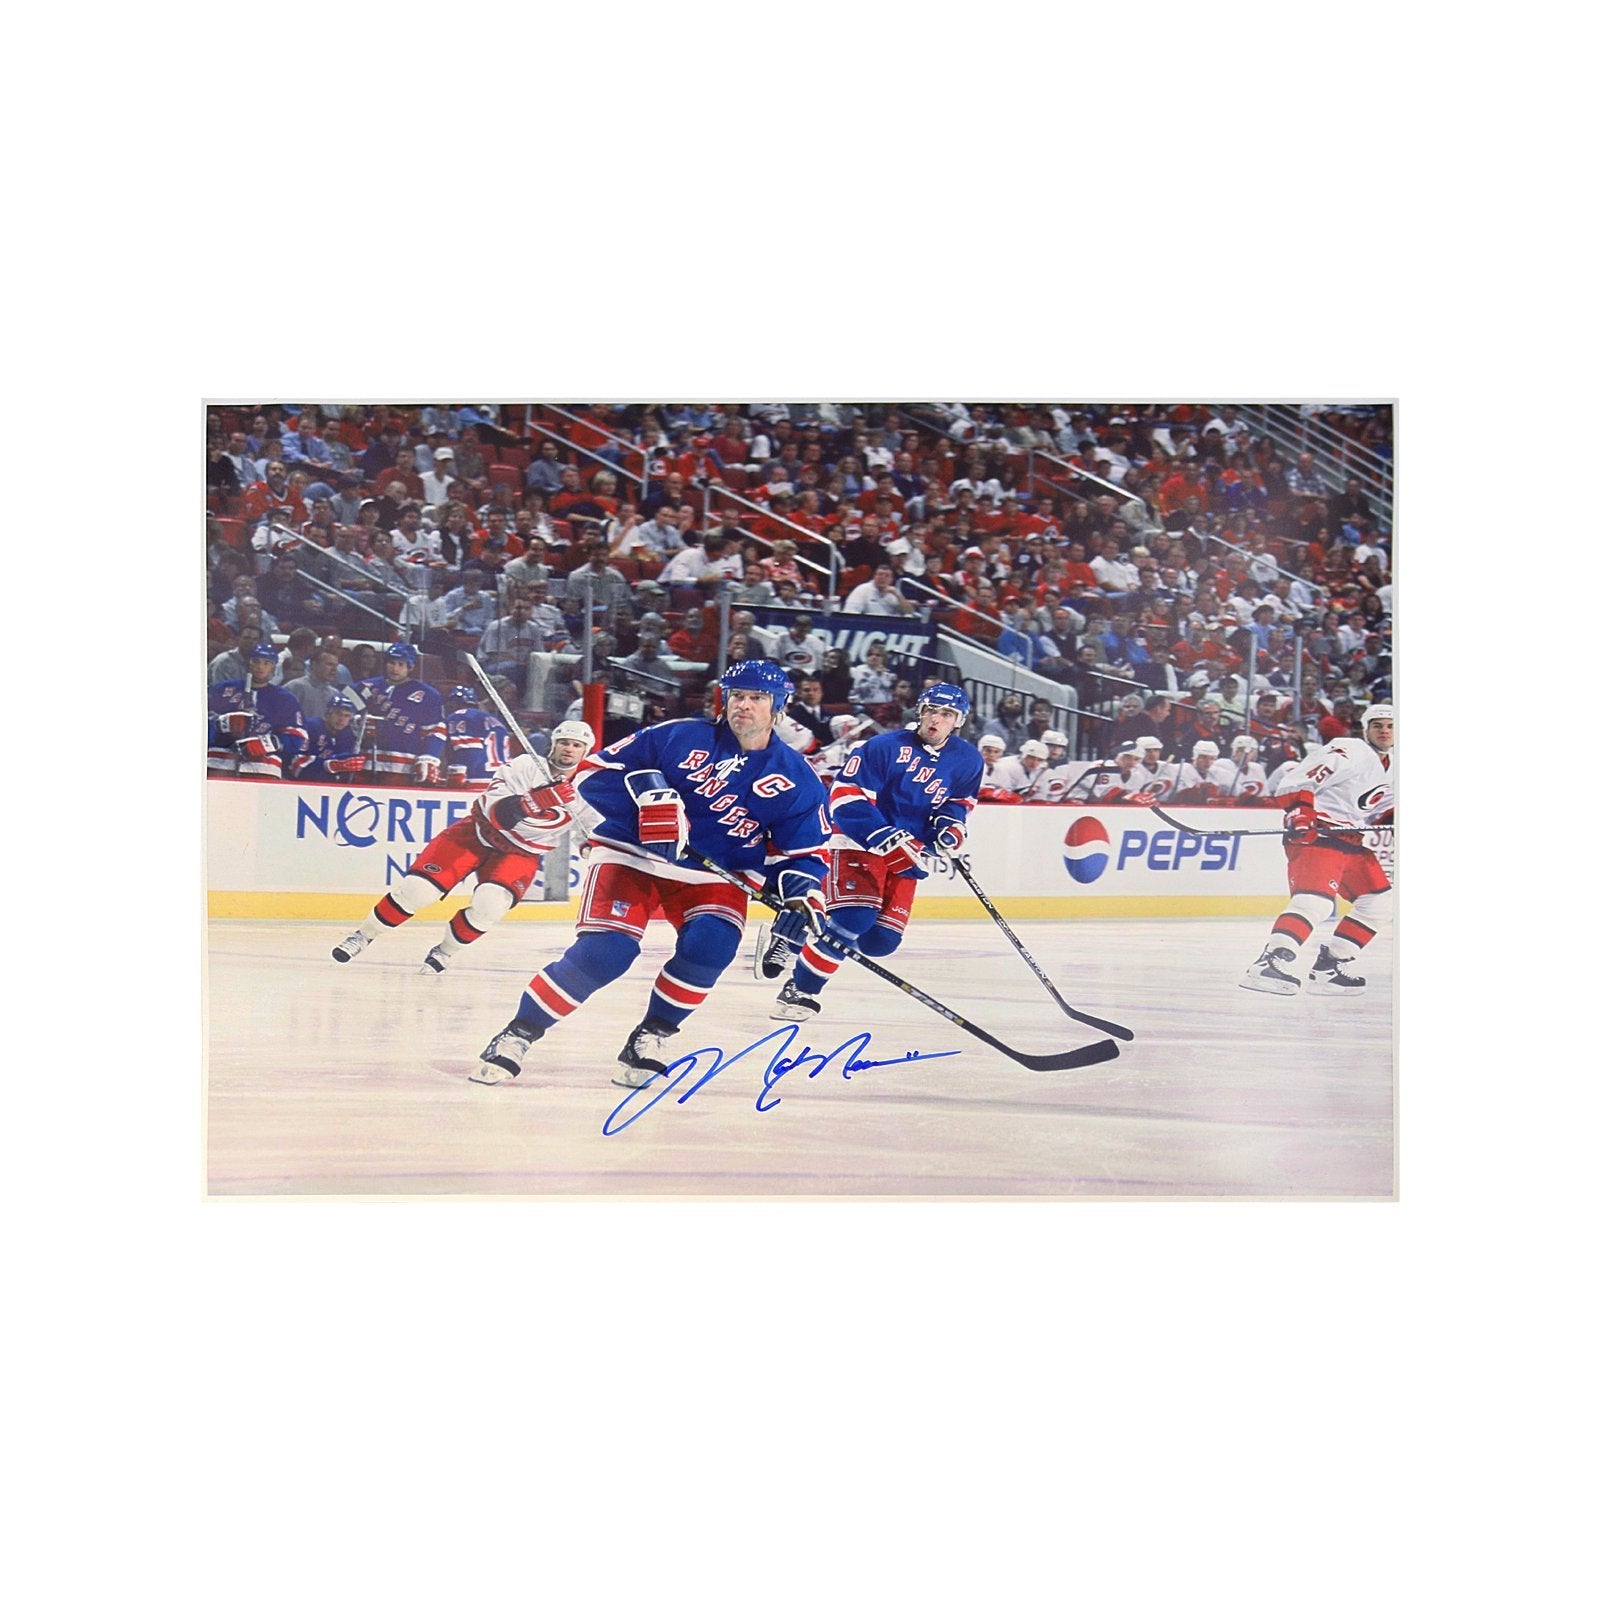 New York Rangers Memories: Mark Messier and the game six guarantee